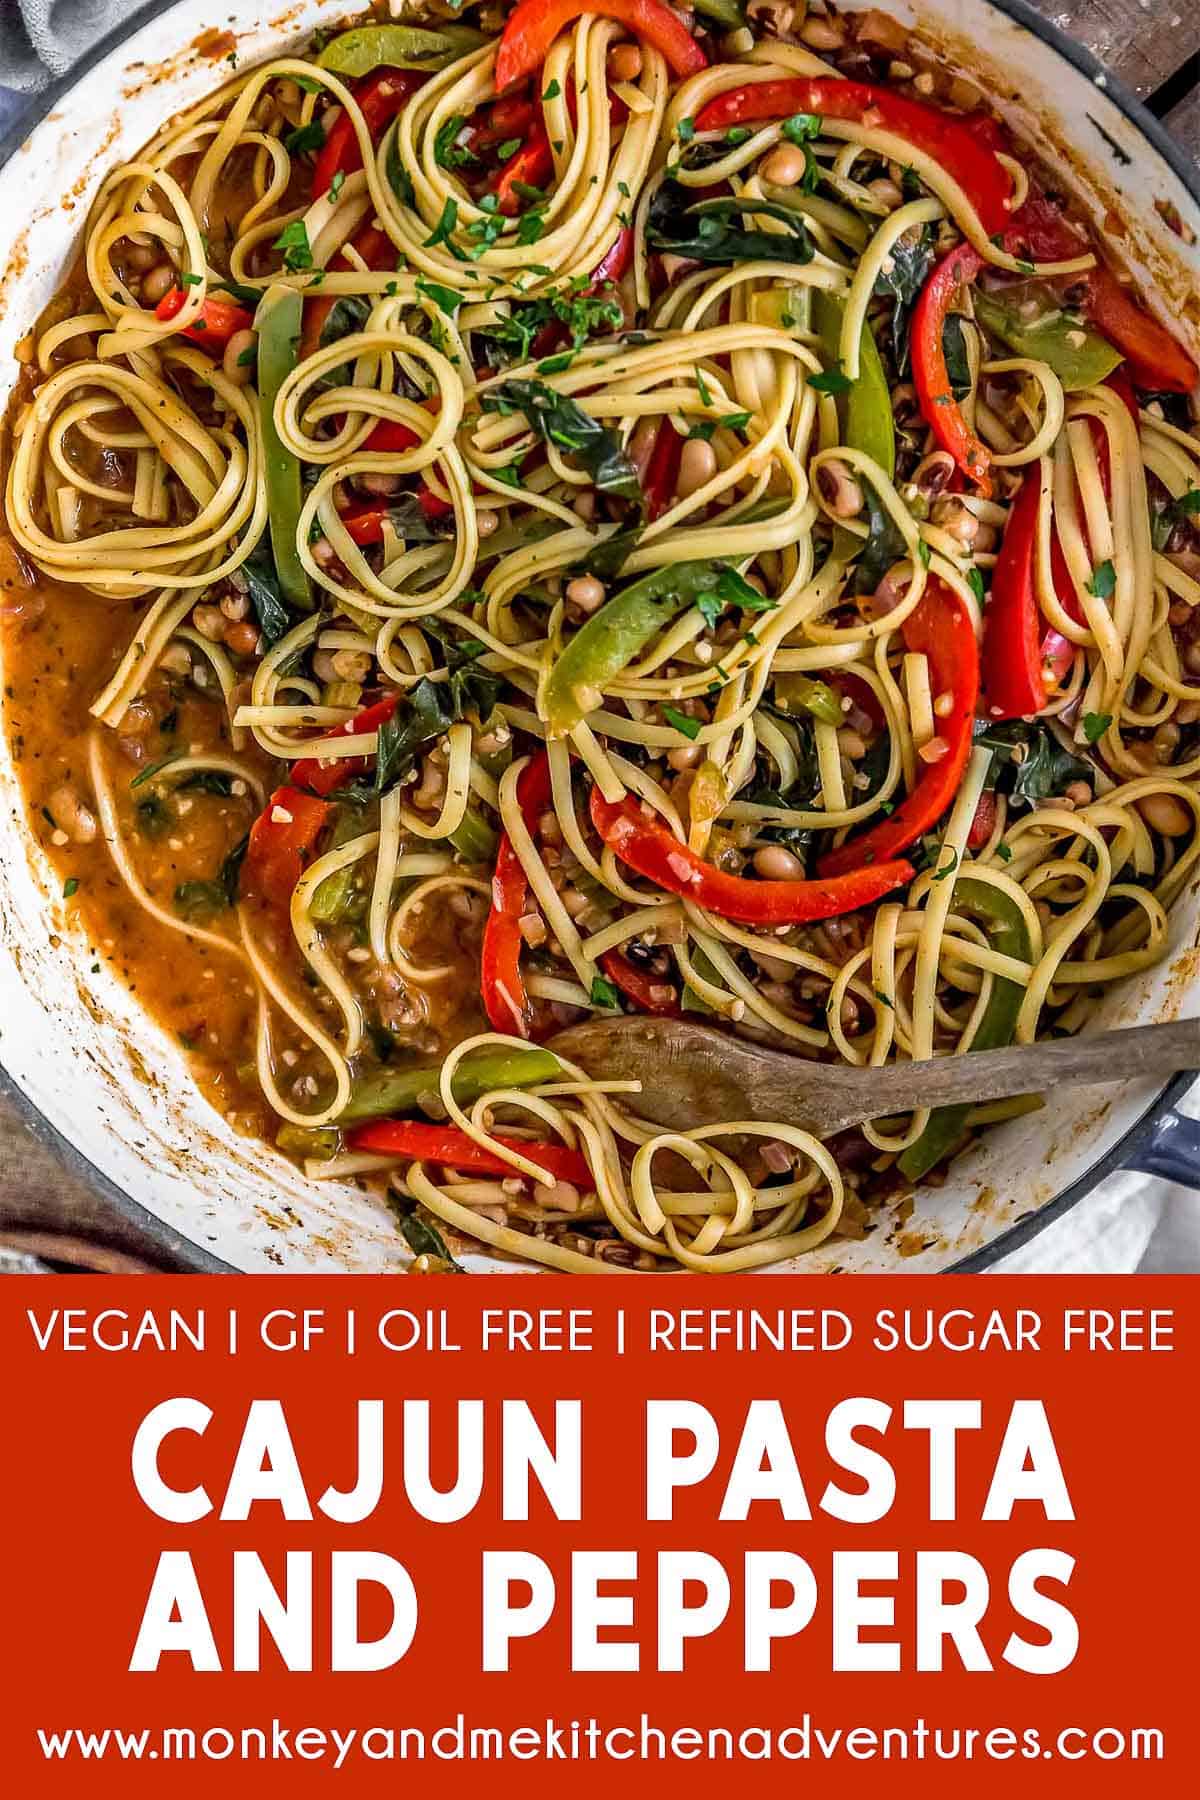 Cajun Pasta and Peppers with text description